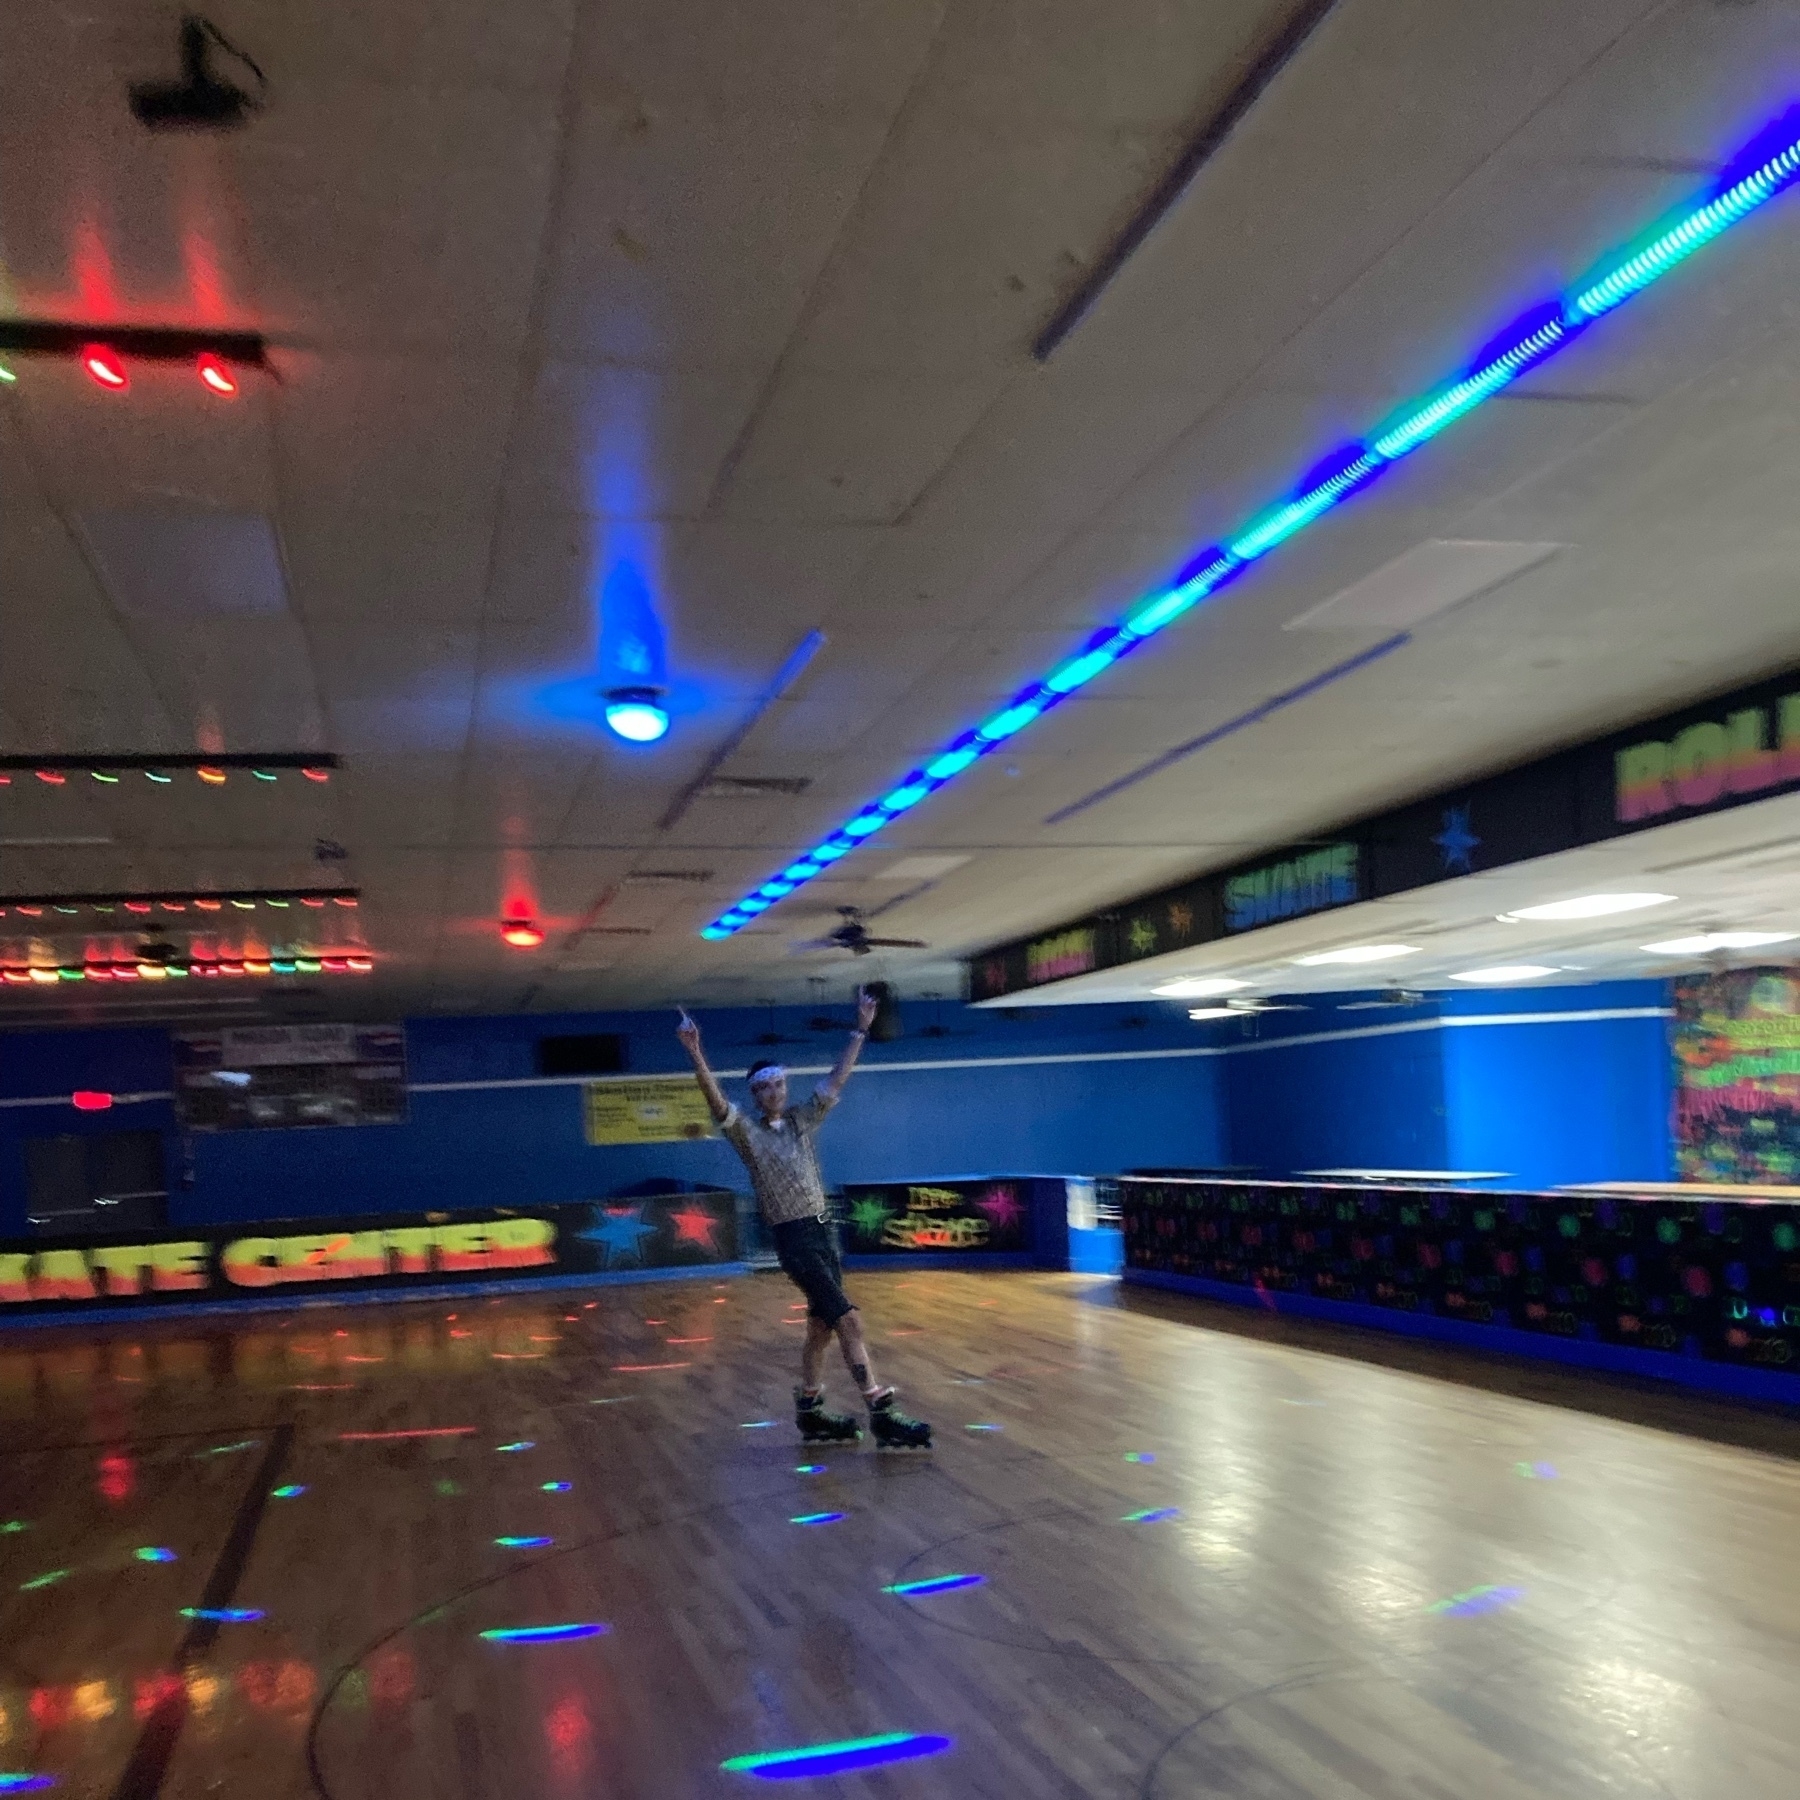 A blurry image of a man roller skating